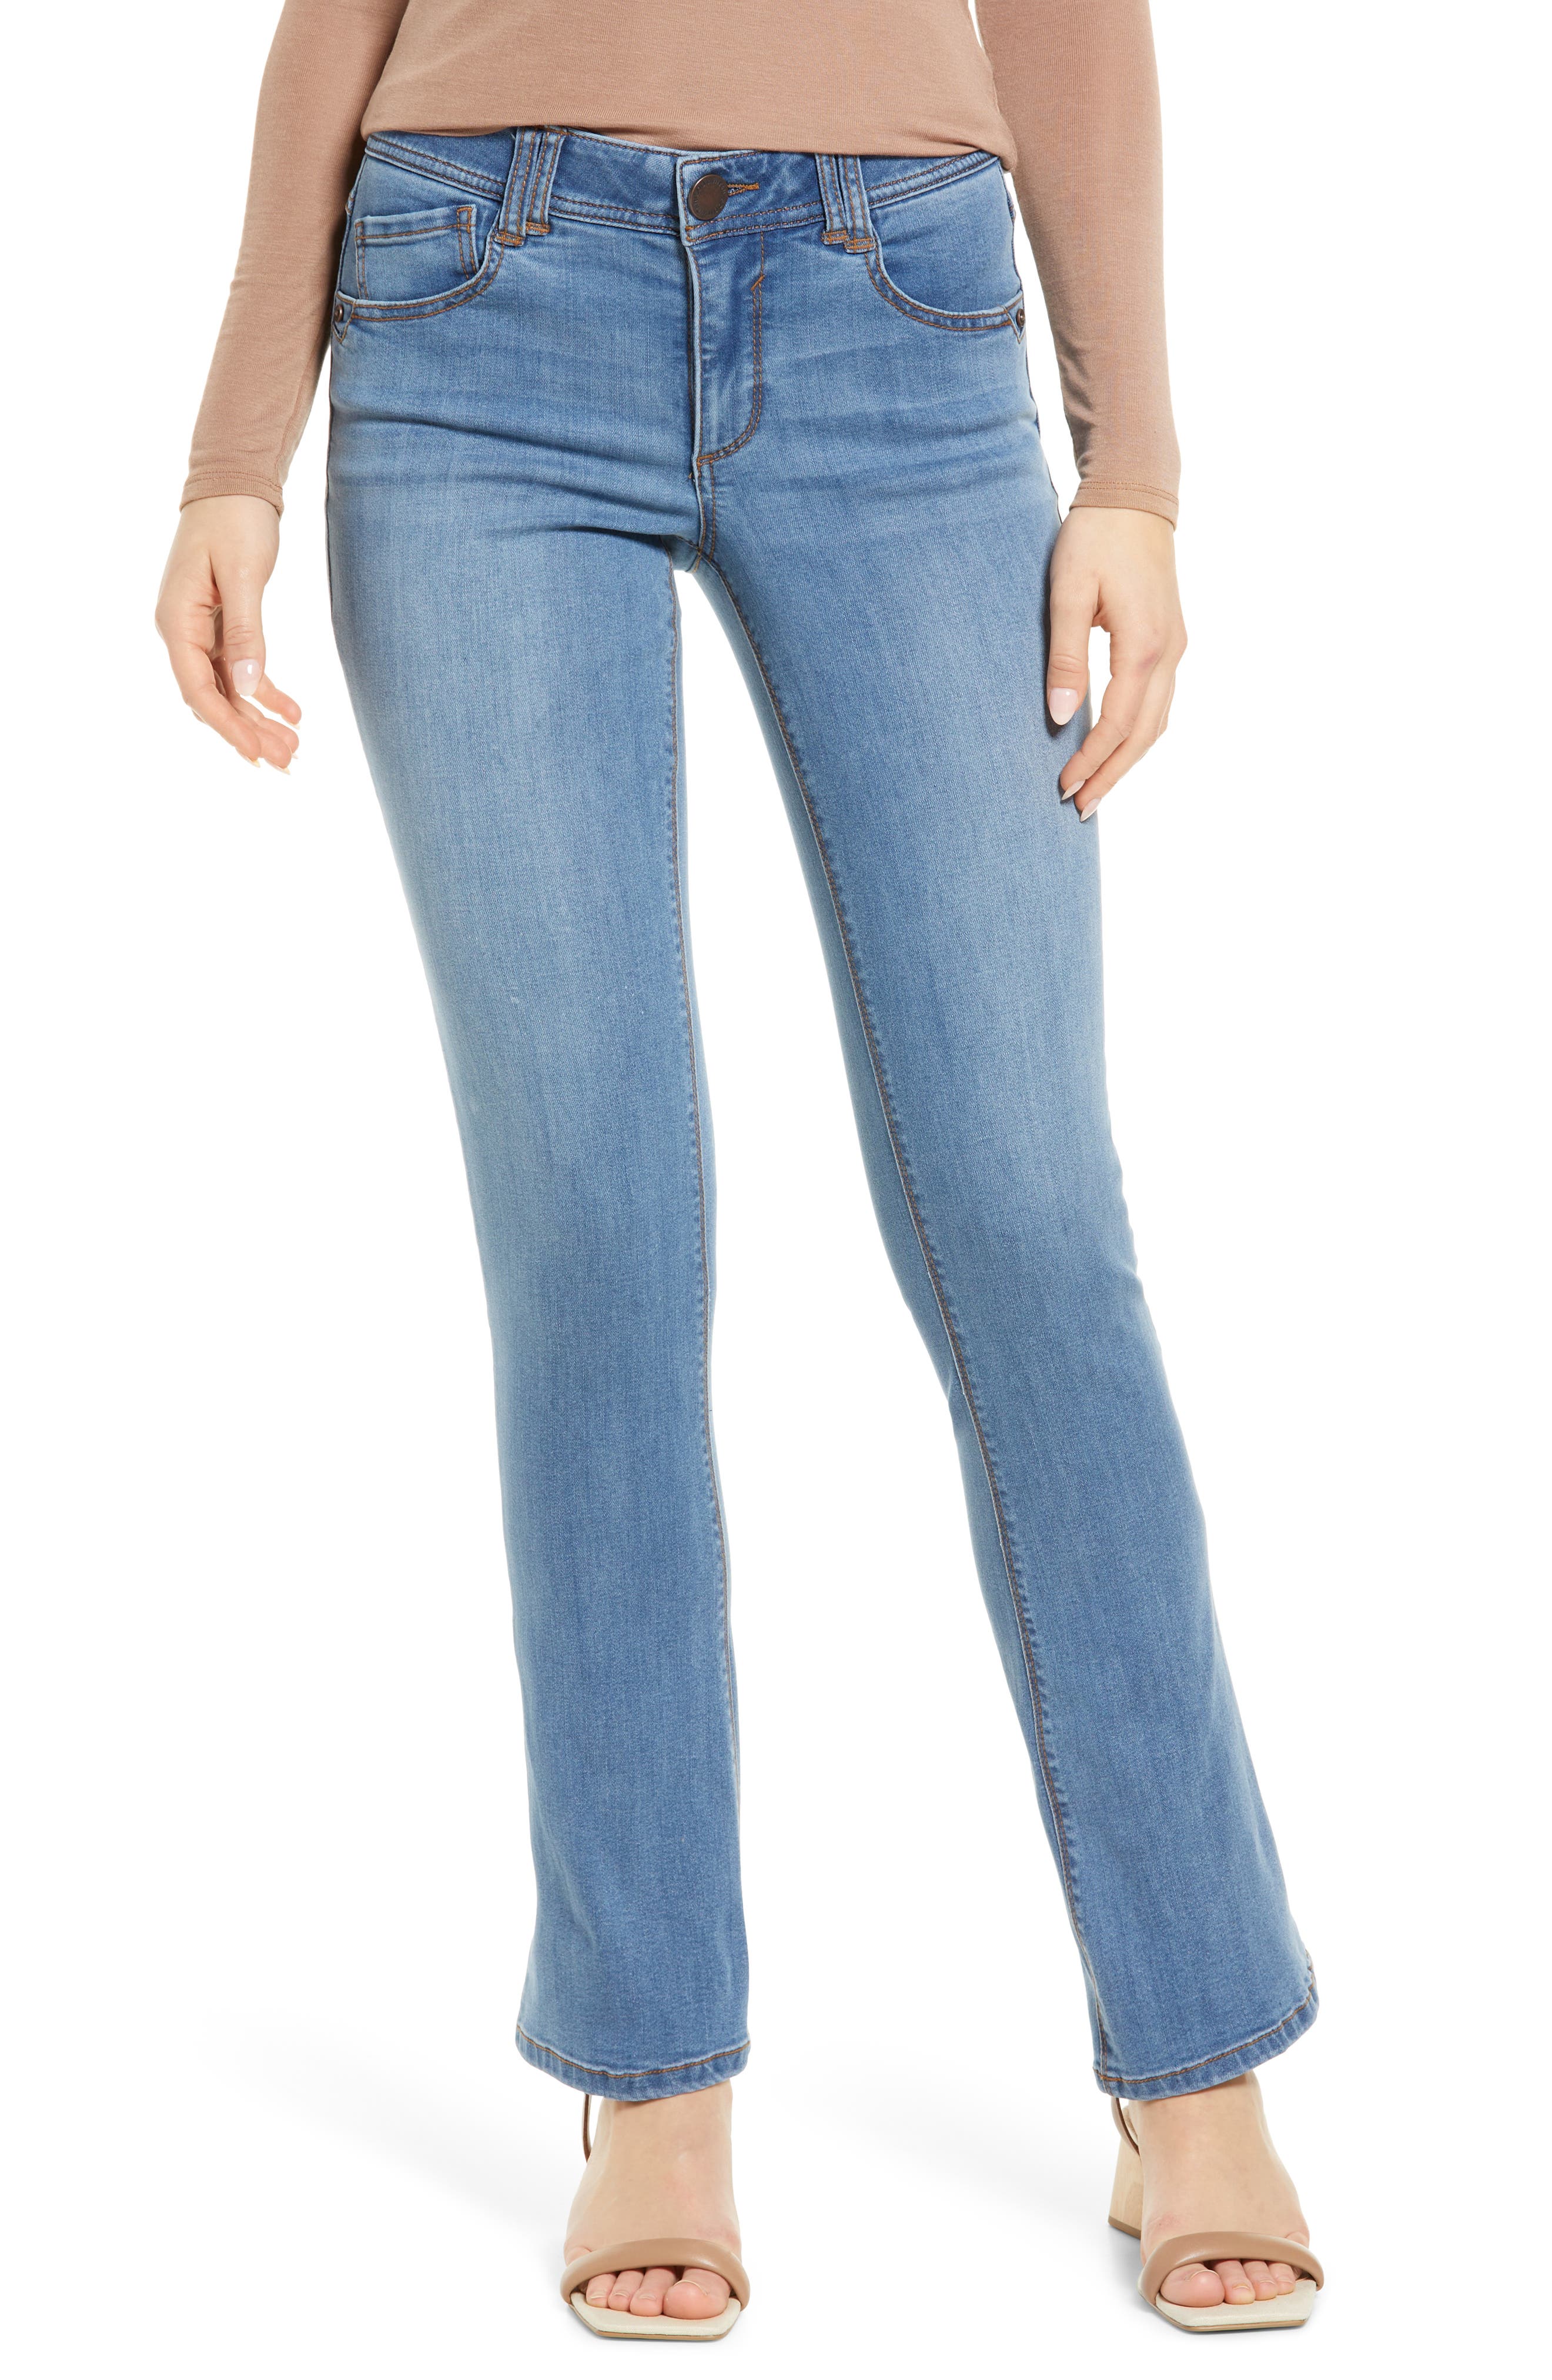 Wit & Wisdom 'Ab'Solution Itty Bitty Bootcut Jeans in Light Blue